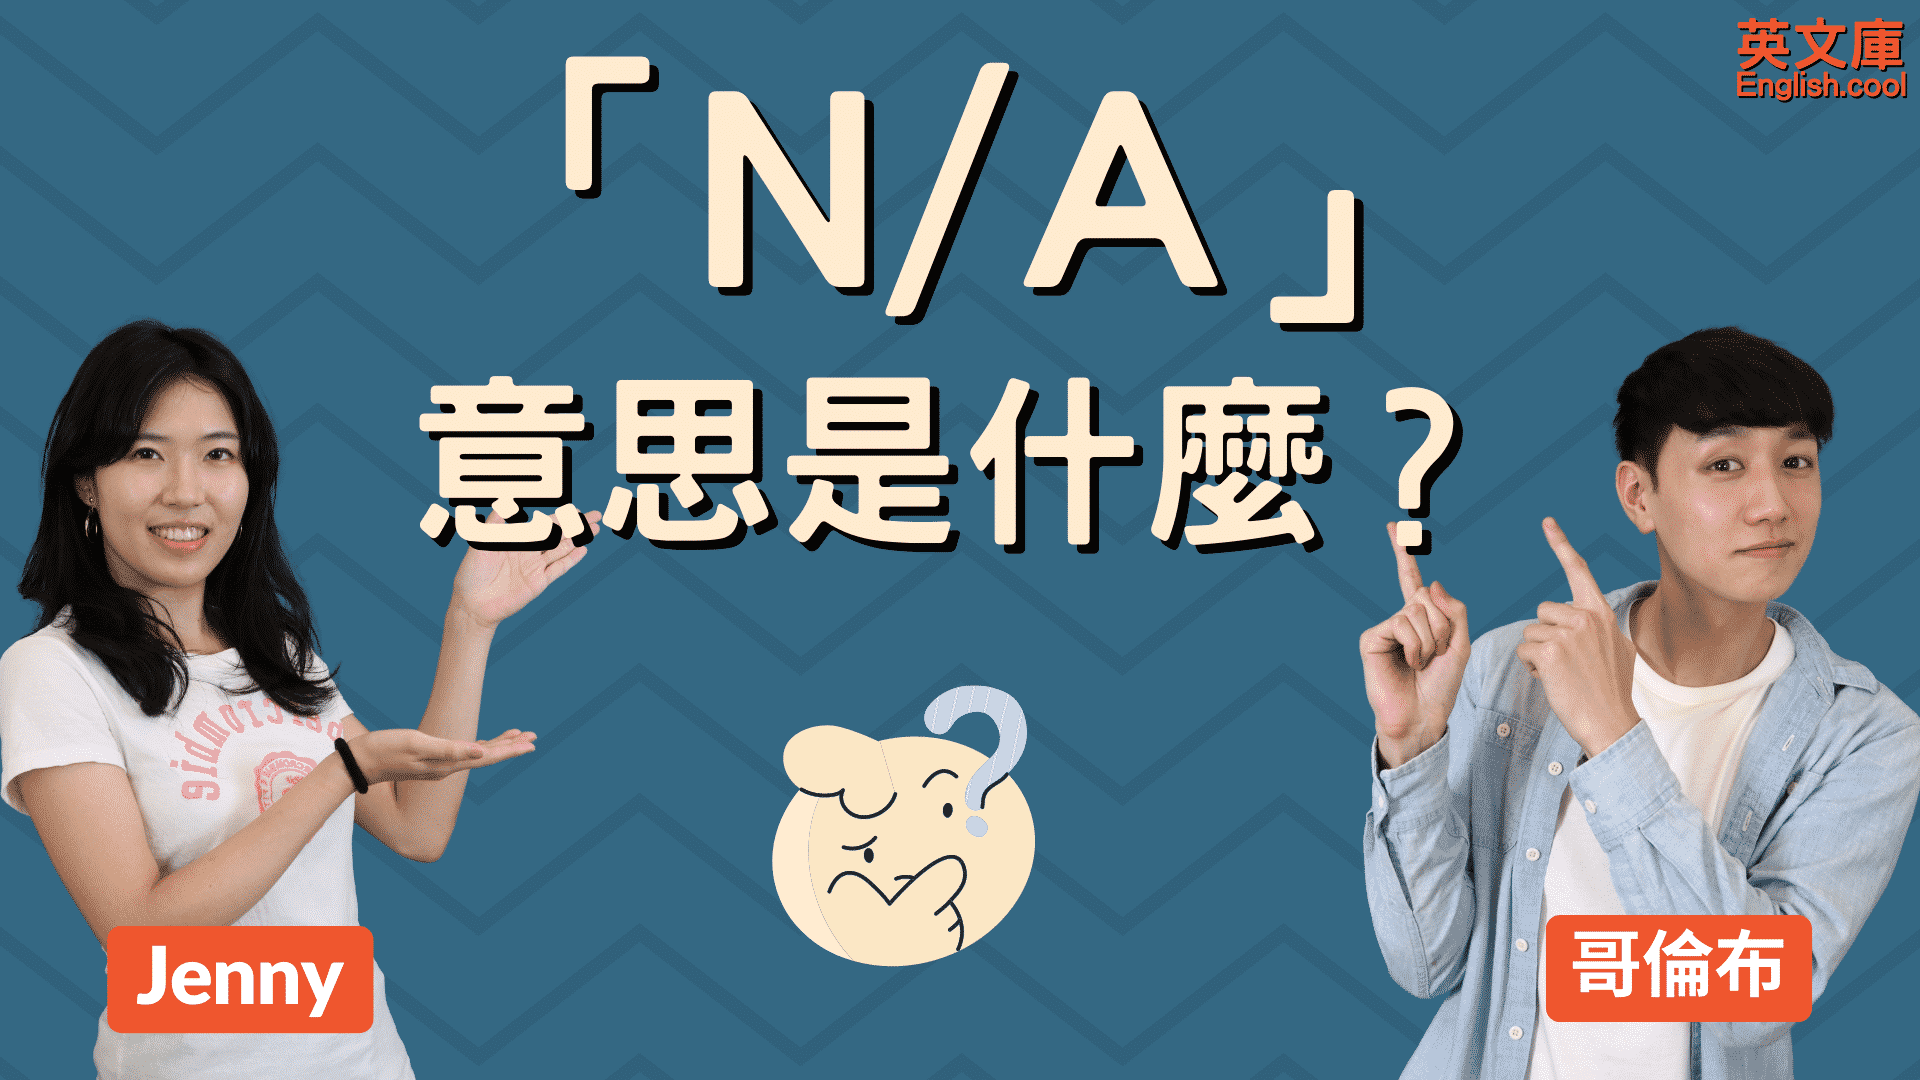 You are currently viewing 「N/A」是什麼意思？ 三個意思，一次搞懂！（含例句）